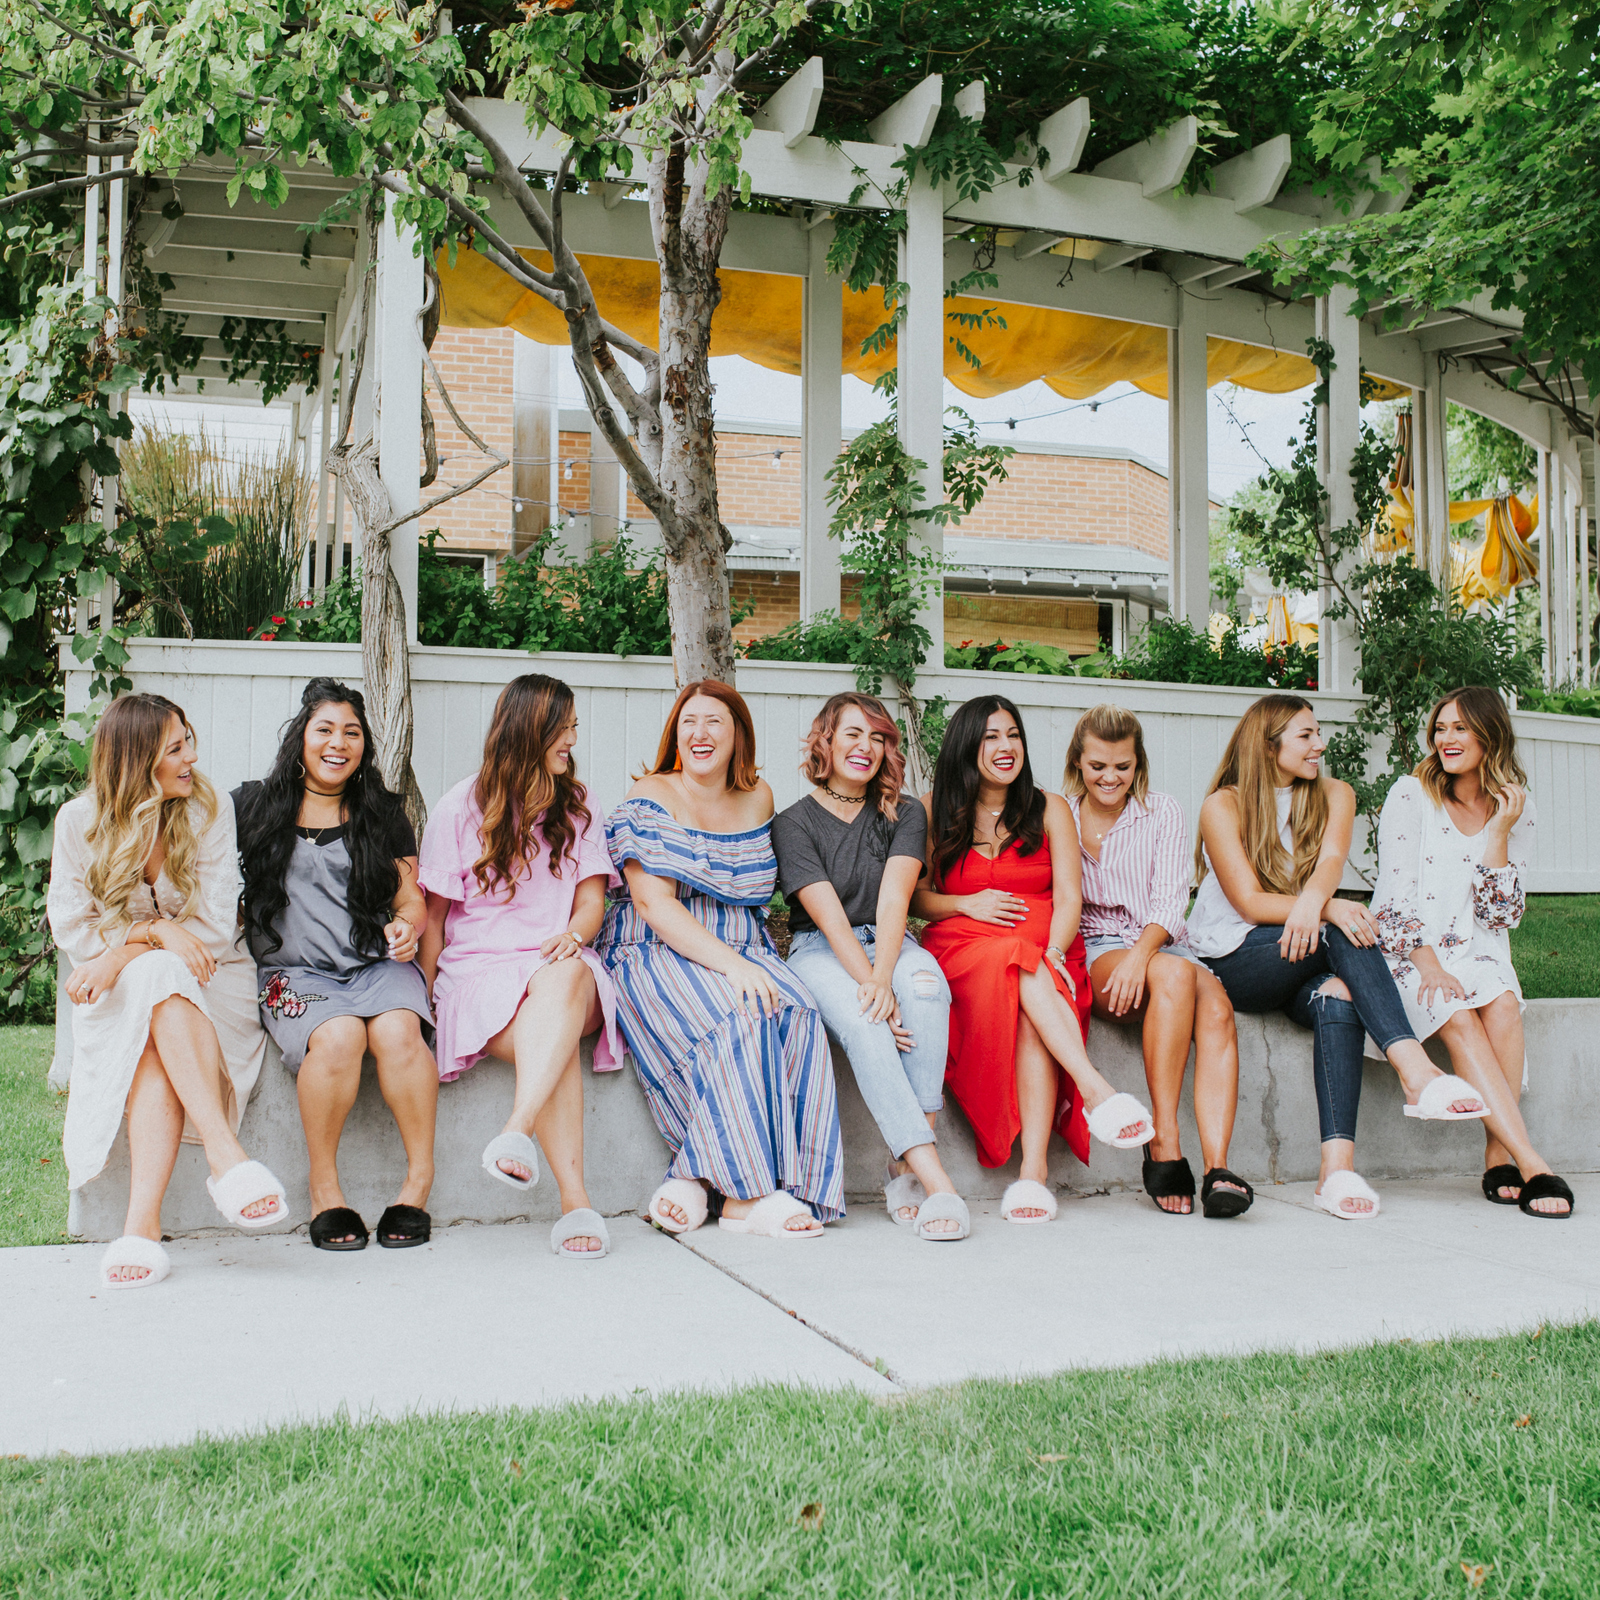 How To Plan The Perfect Girls Day Out! by popular Utah blogger Sandy A La Mode